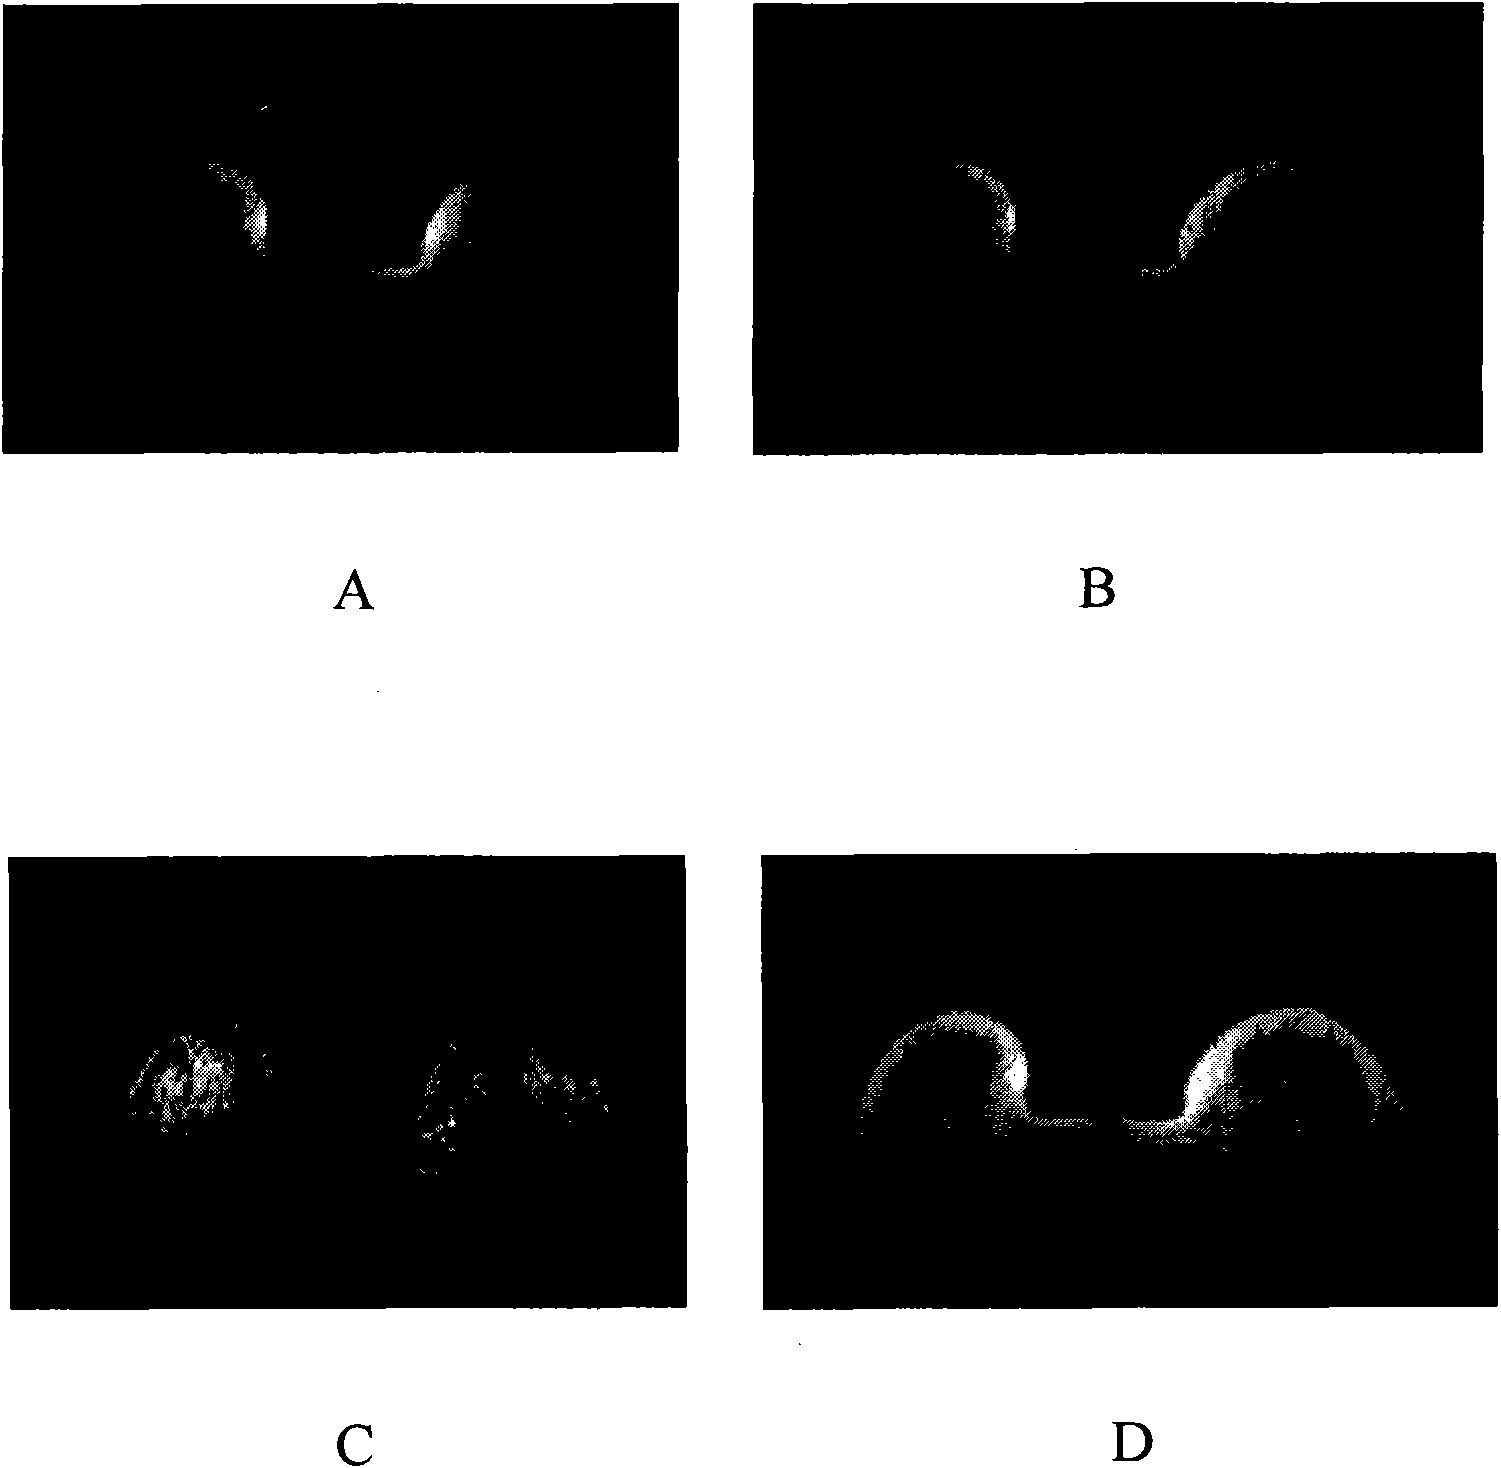 Tissue separation imaging method based on inversion recovery